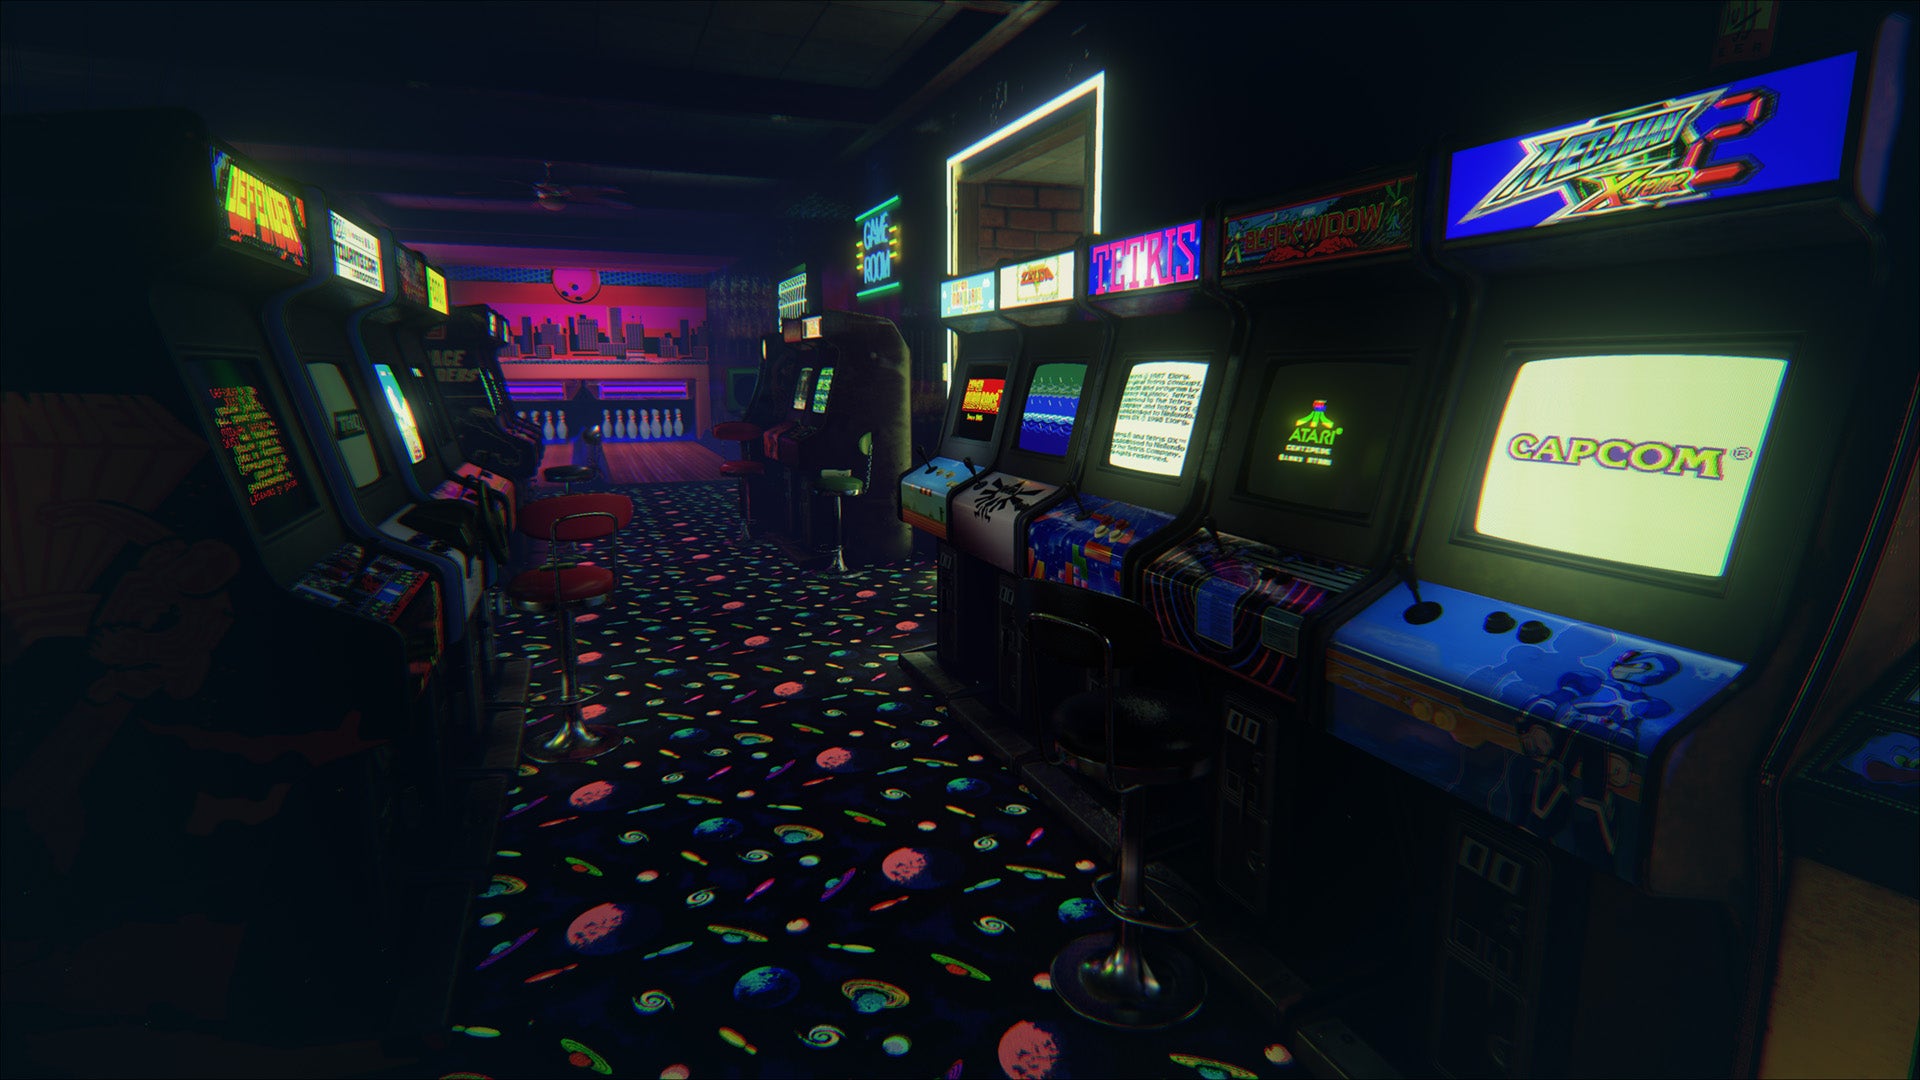 This Amazing '80s Arcade Is the Best Virtual Reality Trip Yet